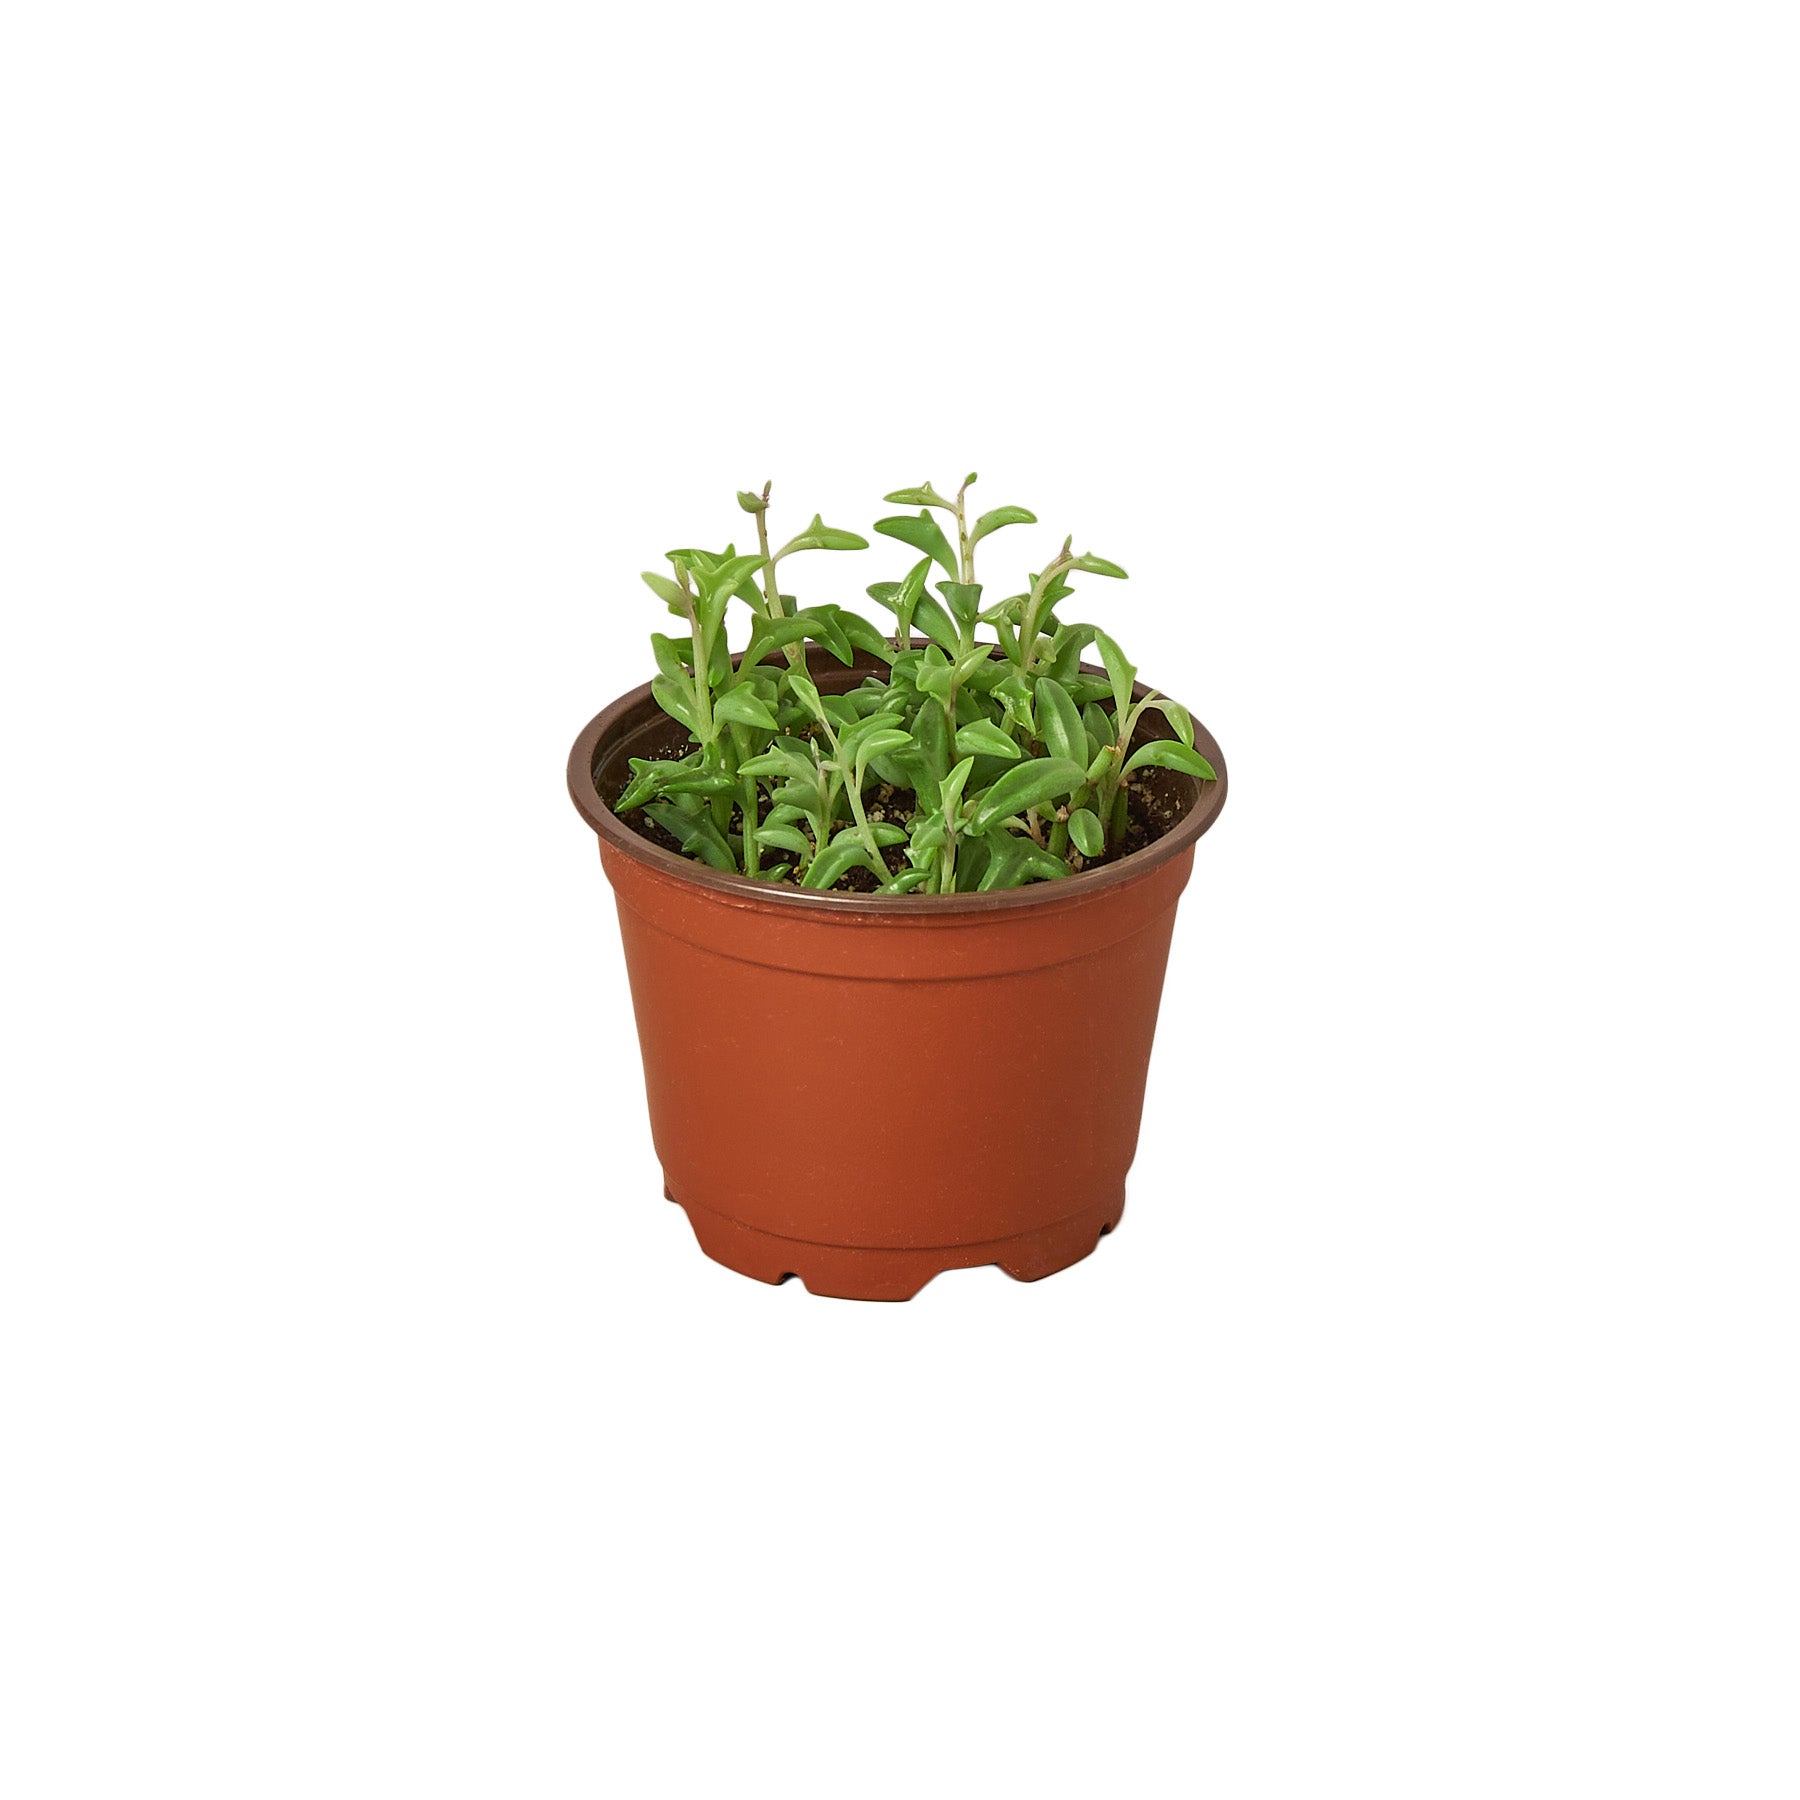 A small potted plant on a white background at a plant nursery near me.